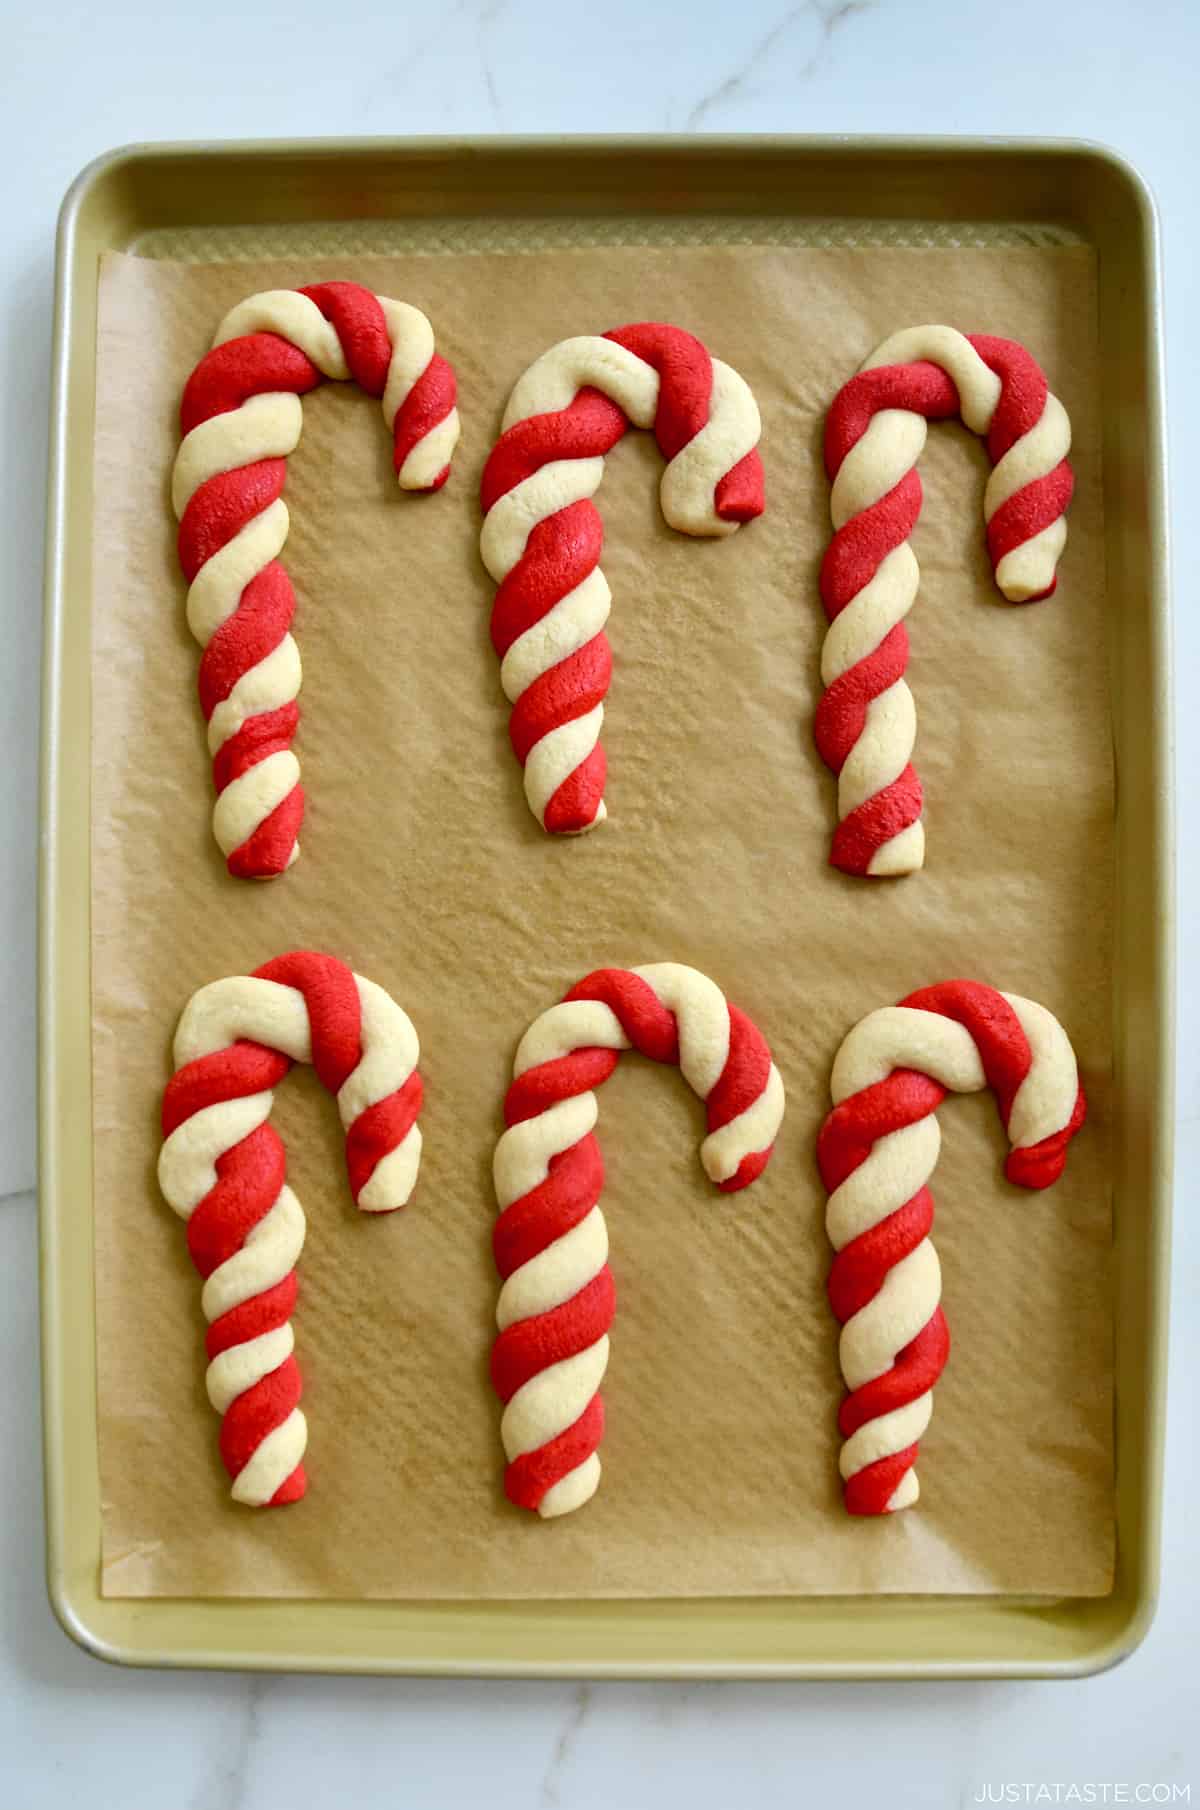 Freshly baked candy cane cookies on a parchment paper-lined baking sheet.